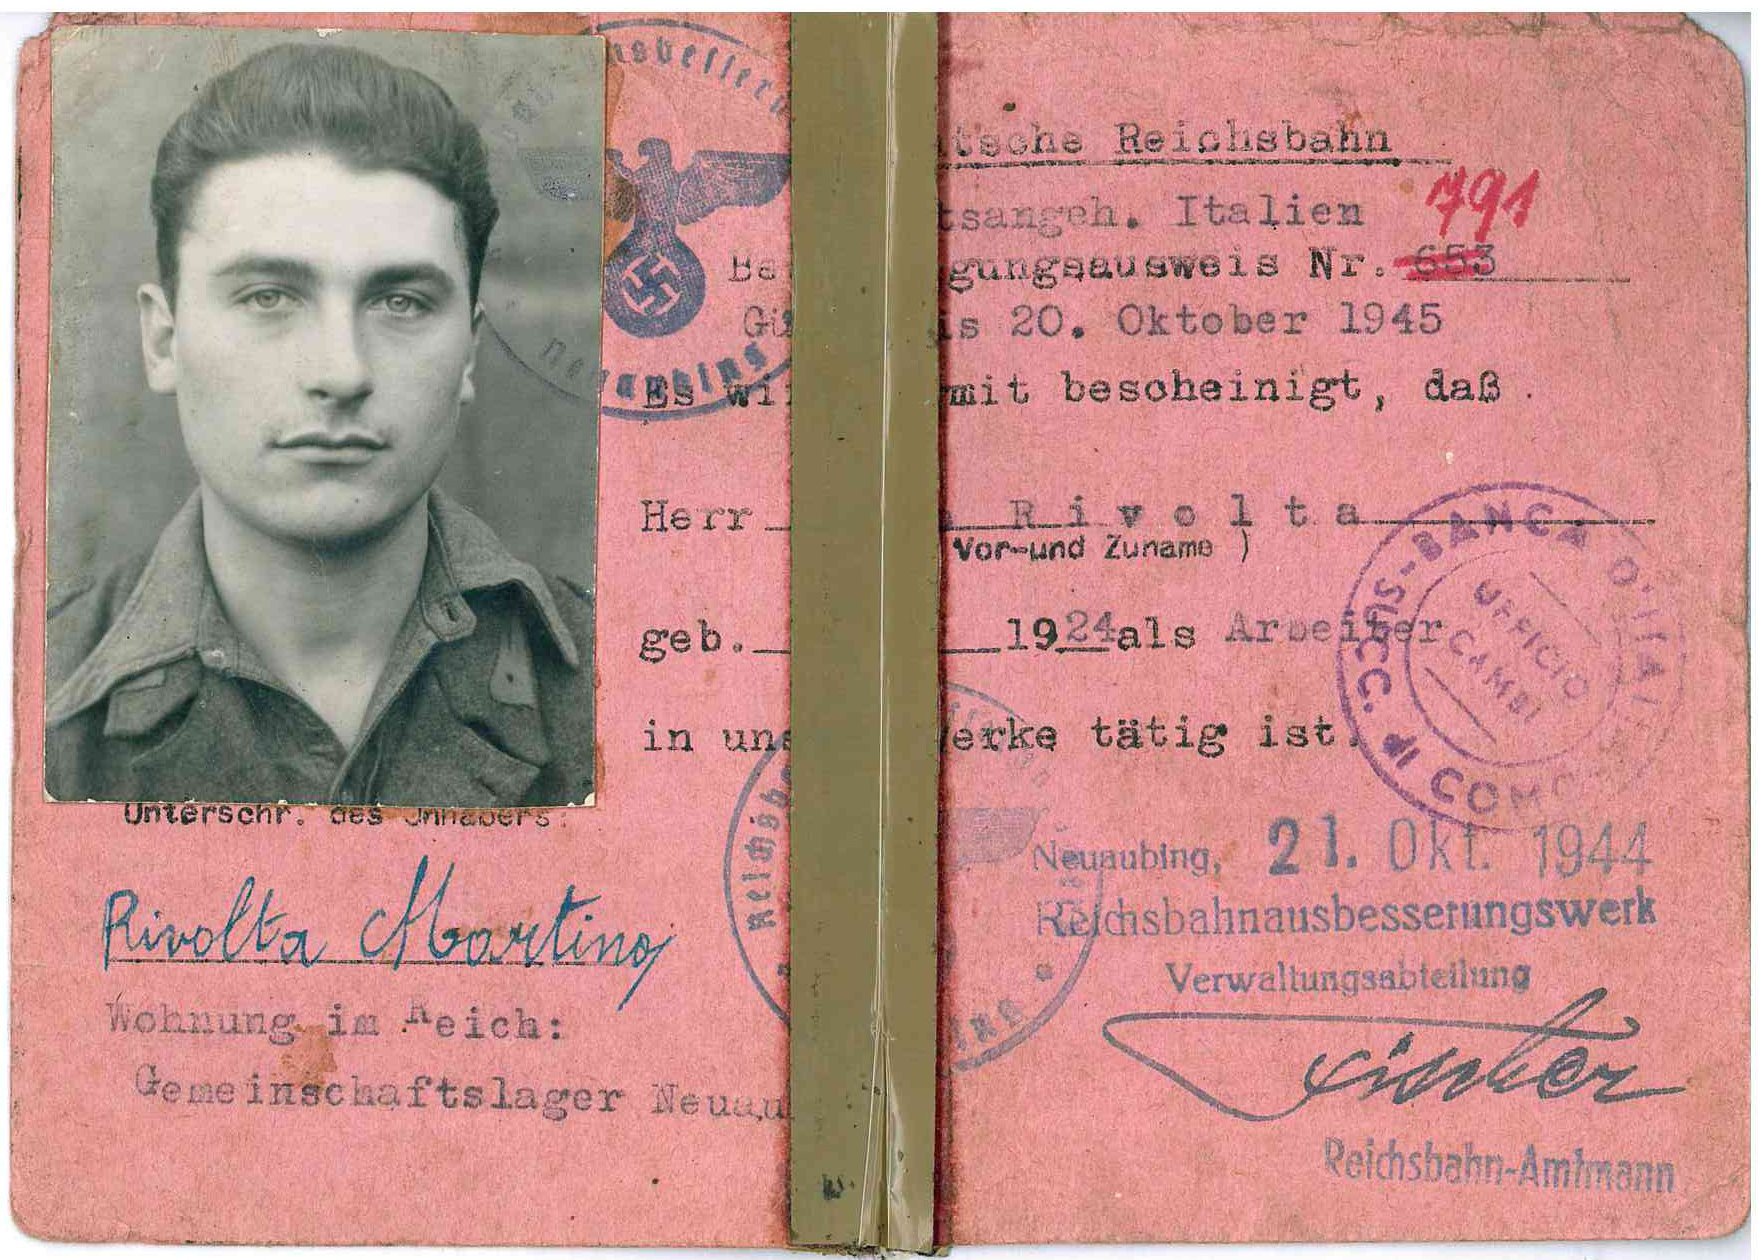 Pink ID card no. 791 with a passport photo and signature of Martino Rivolta. Stamped October 21, 1944.